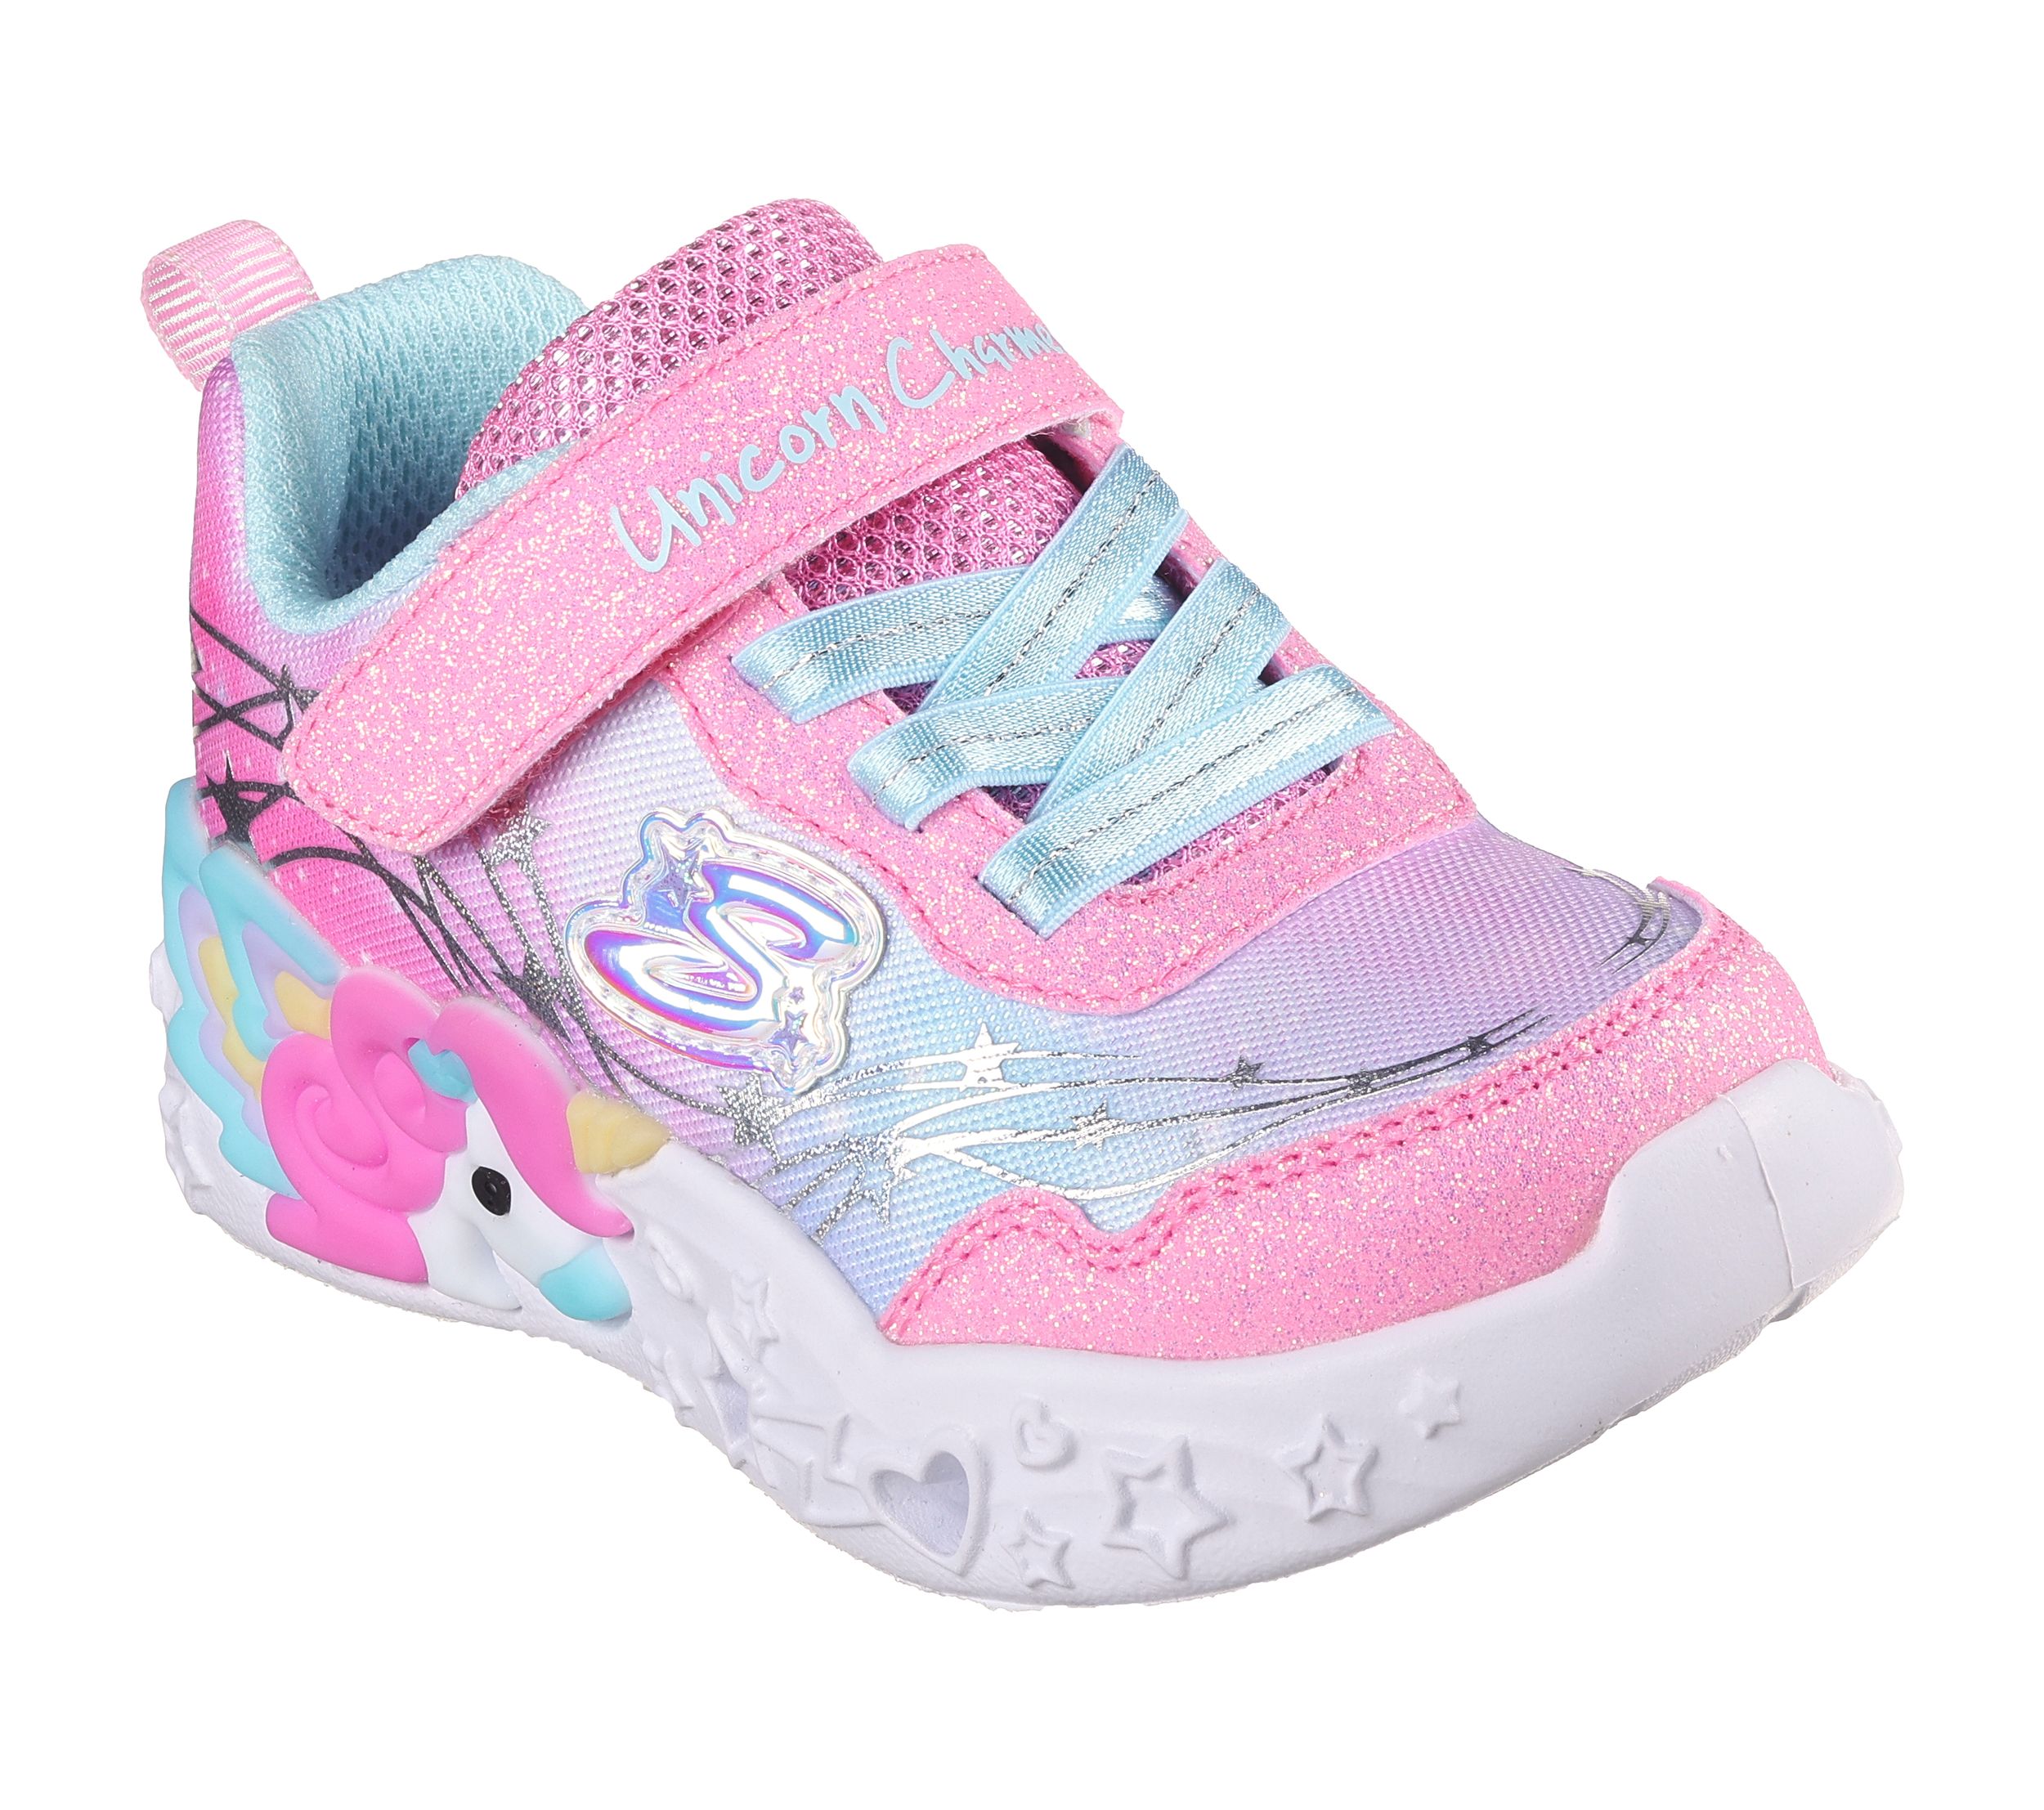 Image of Skechers Kids' Unicorn Charmer Athletic Shoes Sneakers